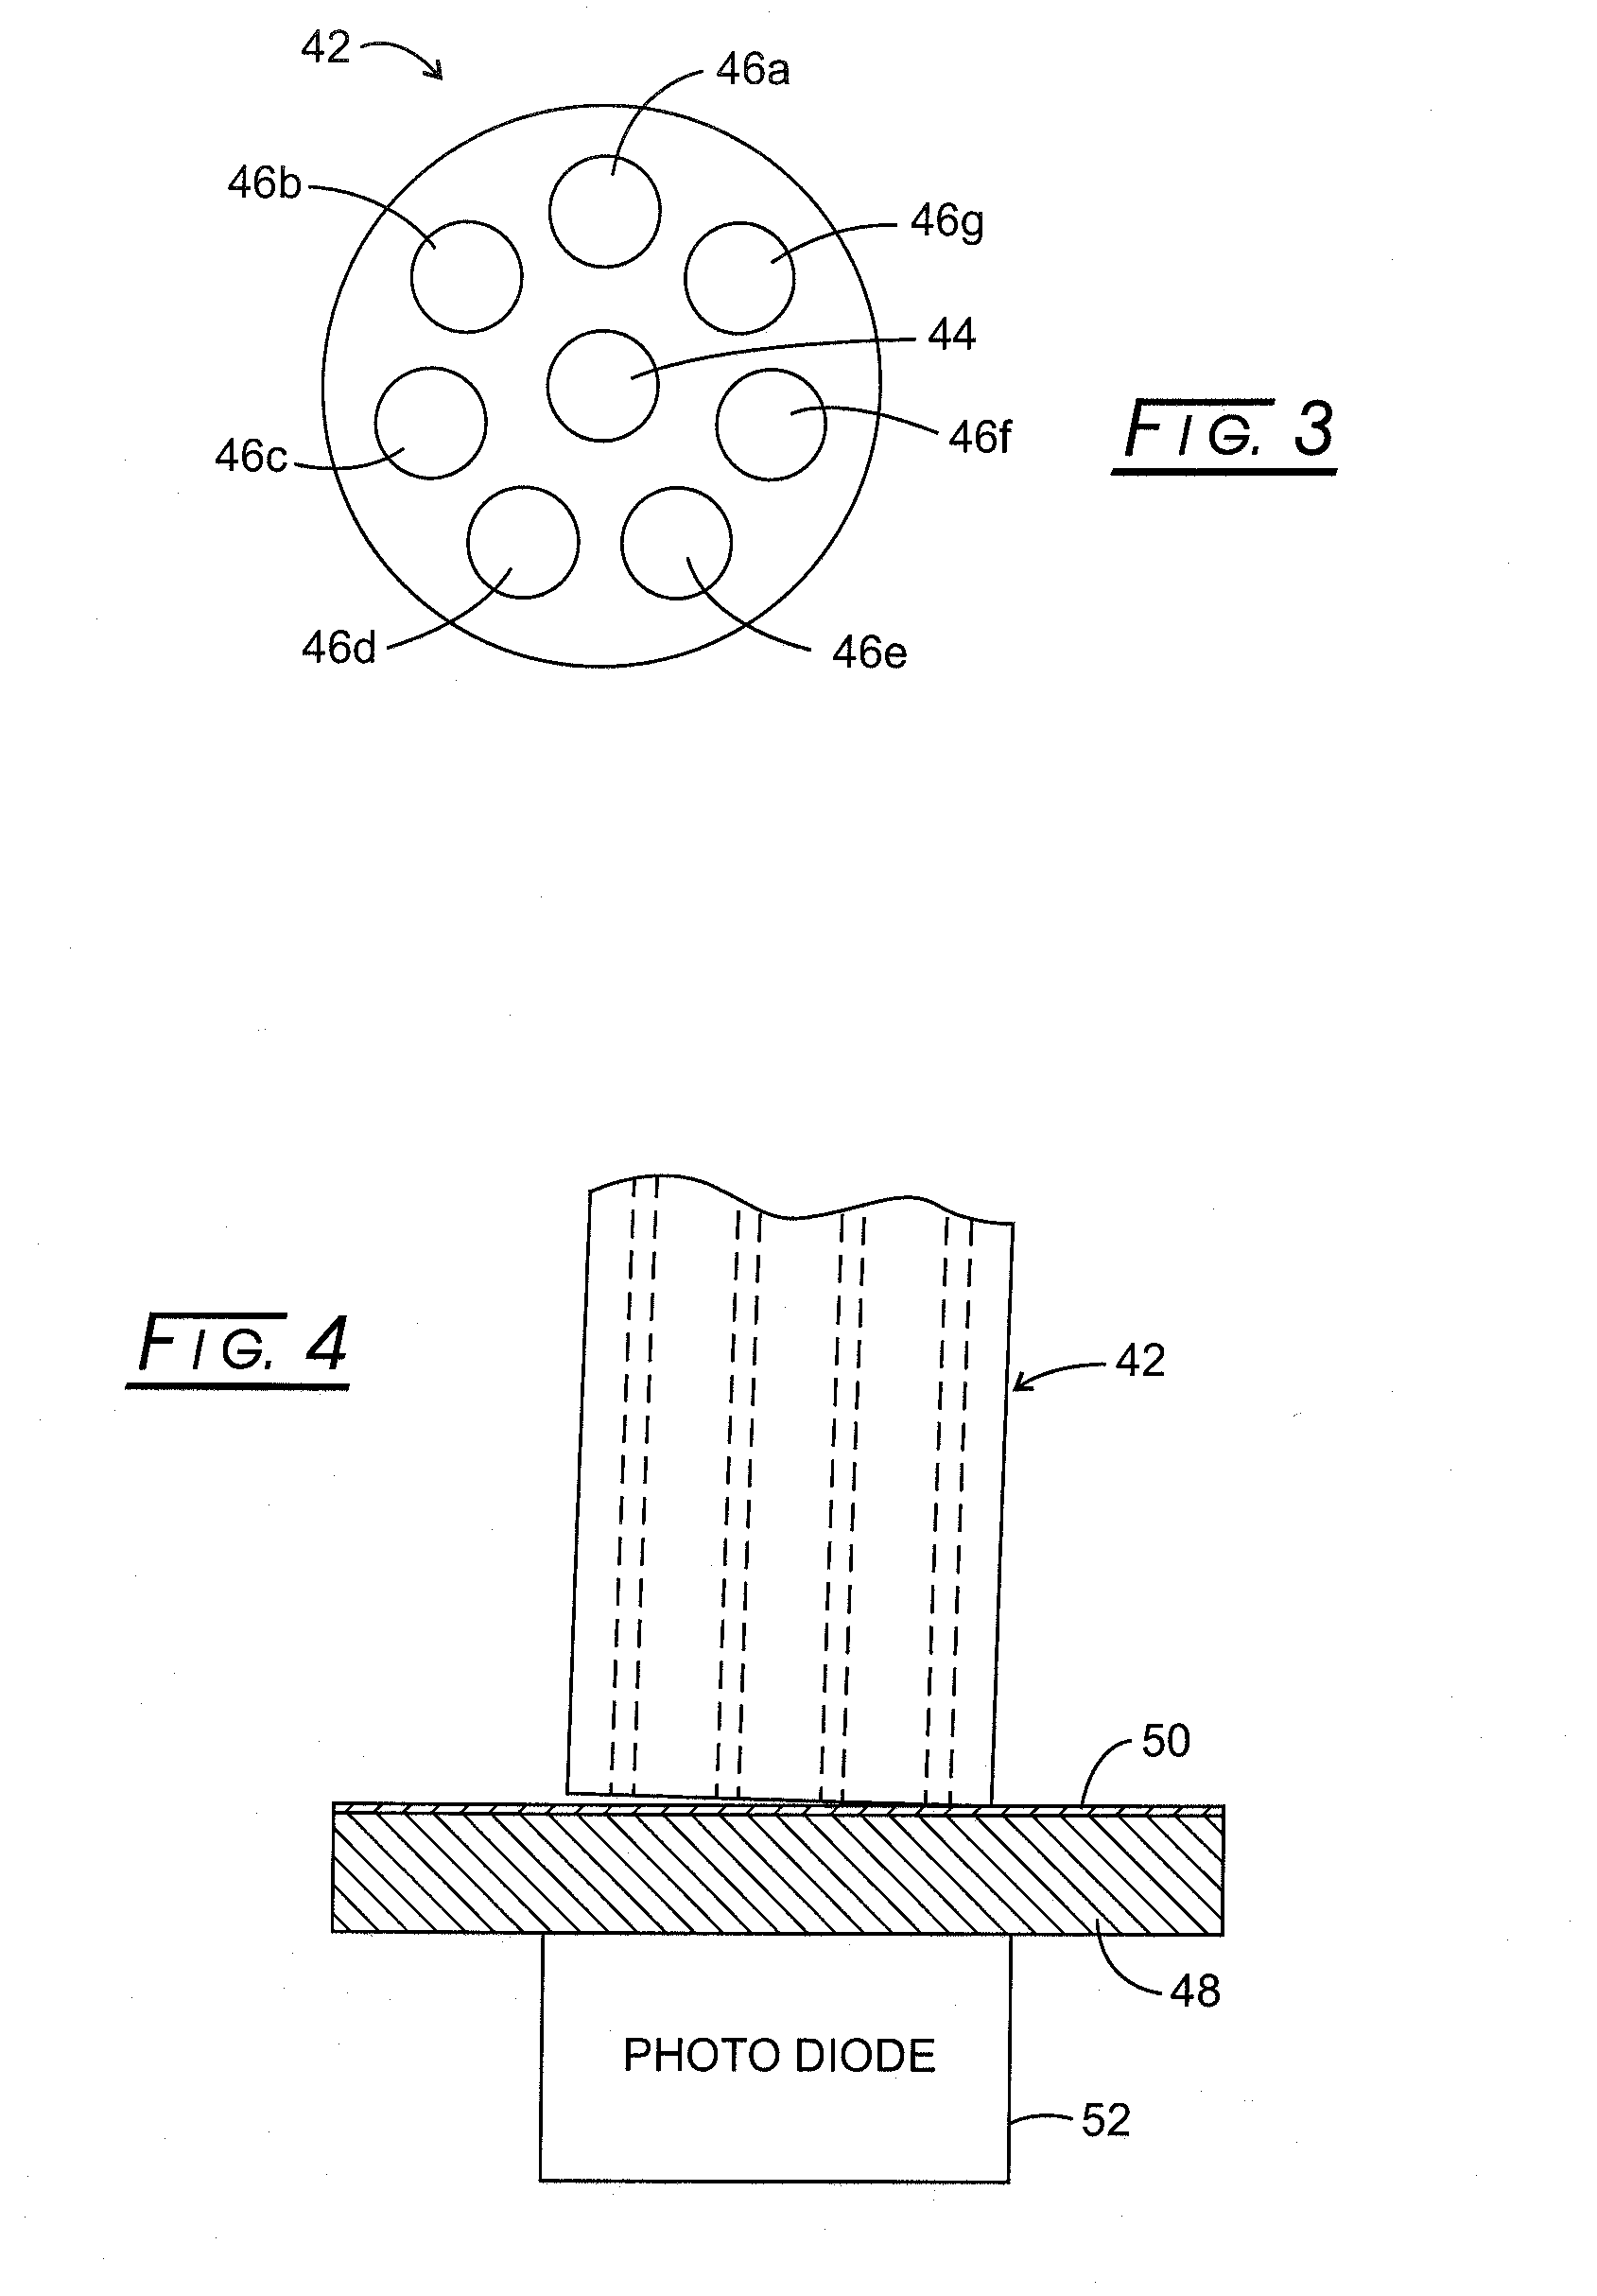 Systems and methods for hemodynamic detection of circulatory anomalies